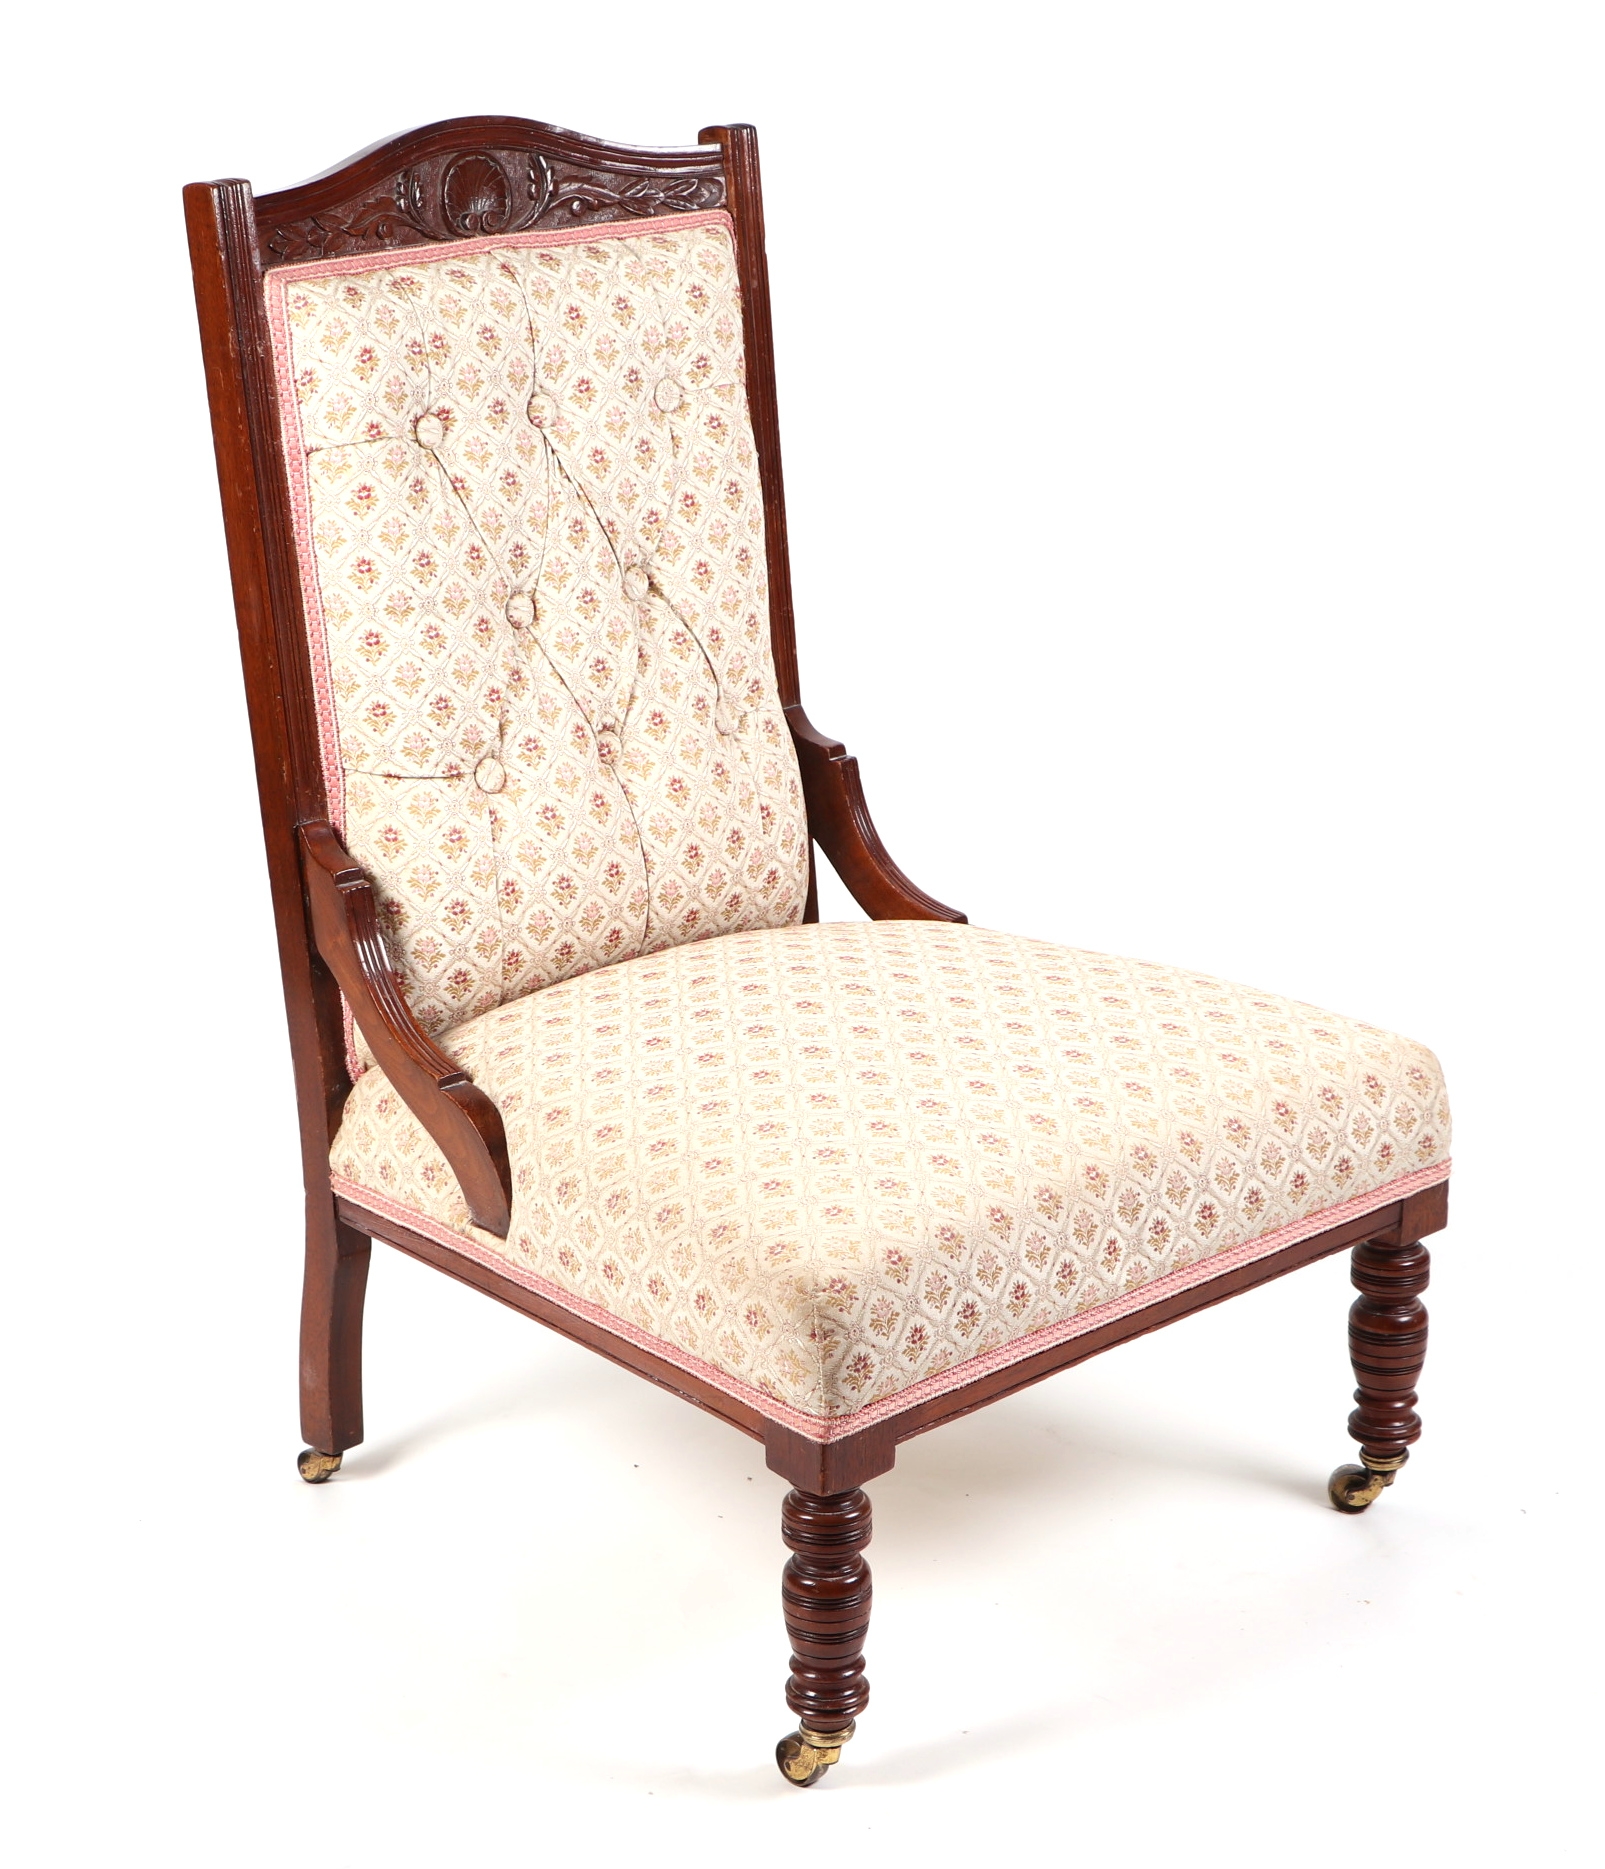 A late Victorian/Edwardian carved walnut upholstered nursing chair, with turned front legs.